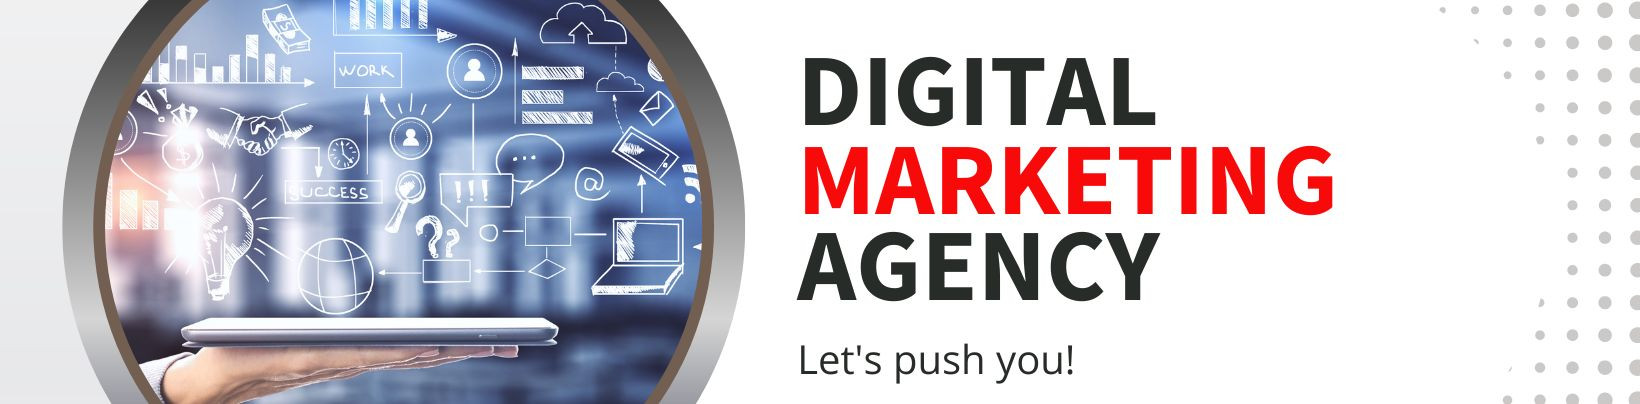 We are a digital marketing agency working to give your brand the recognition it needs.